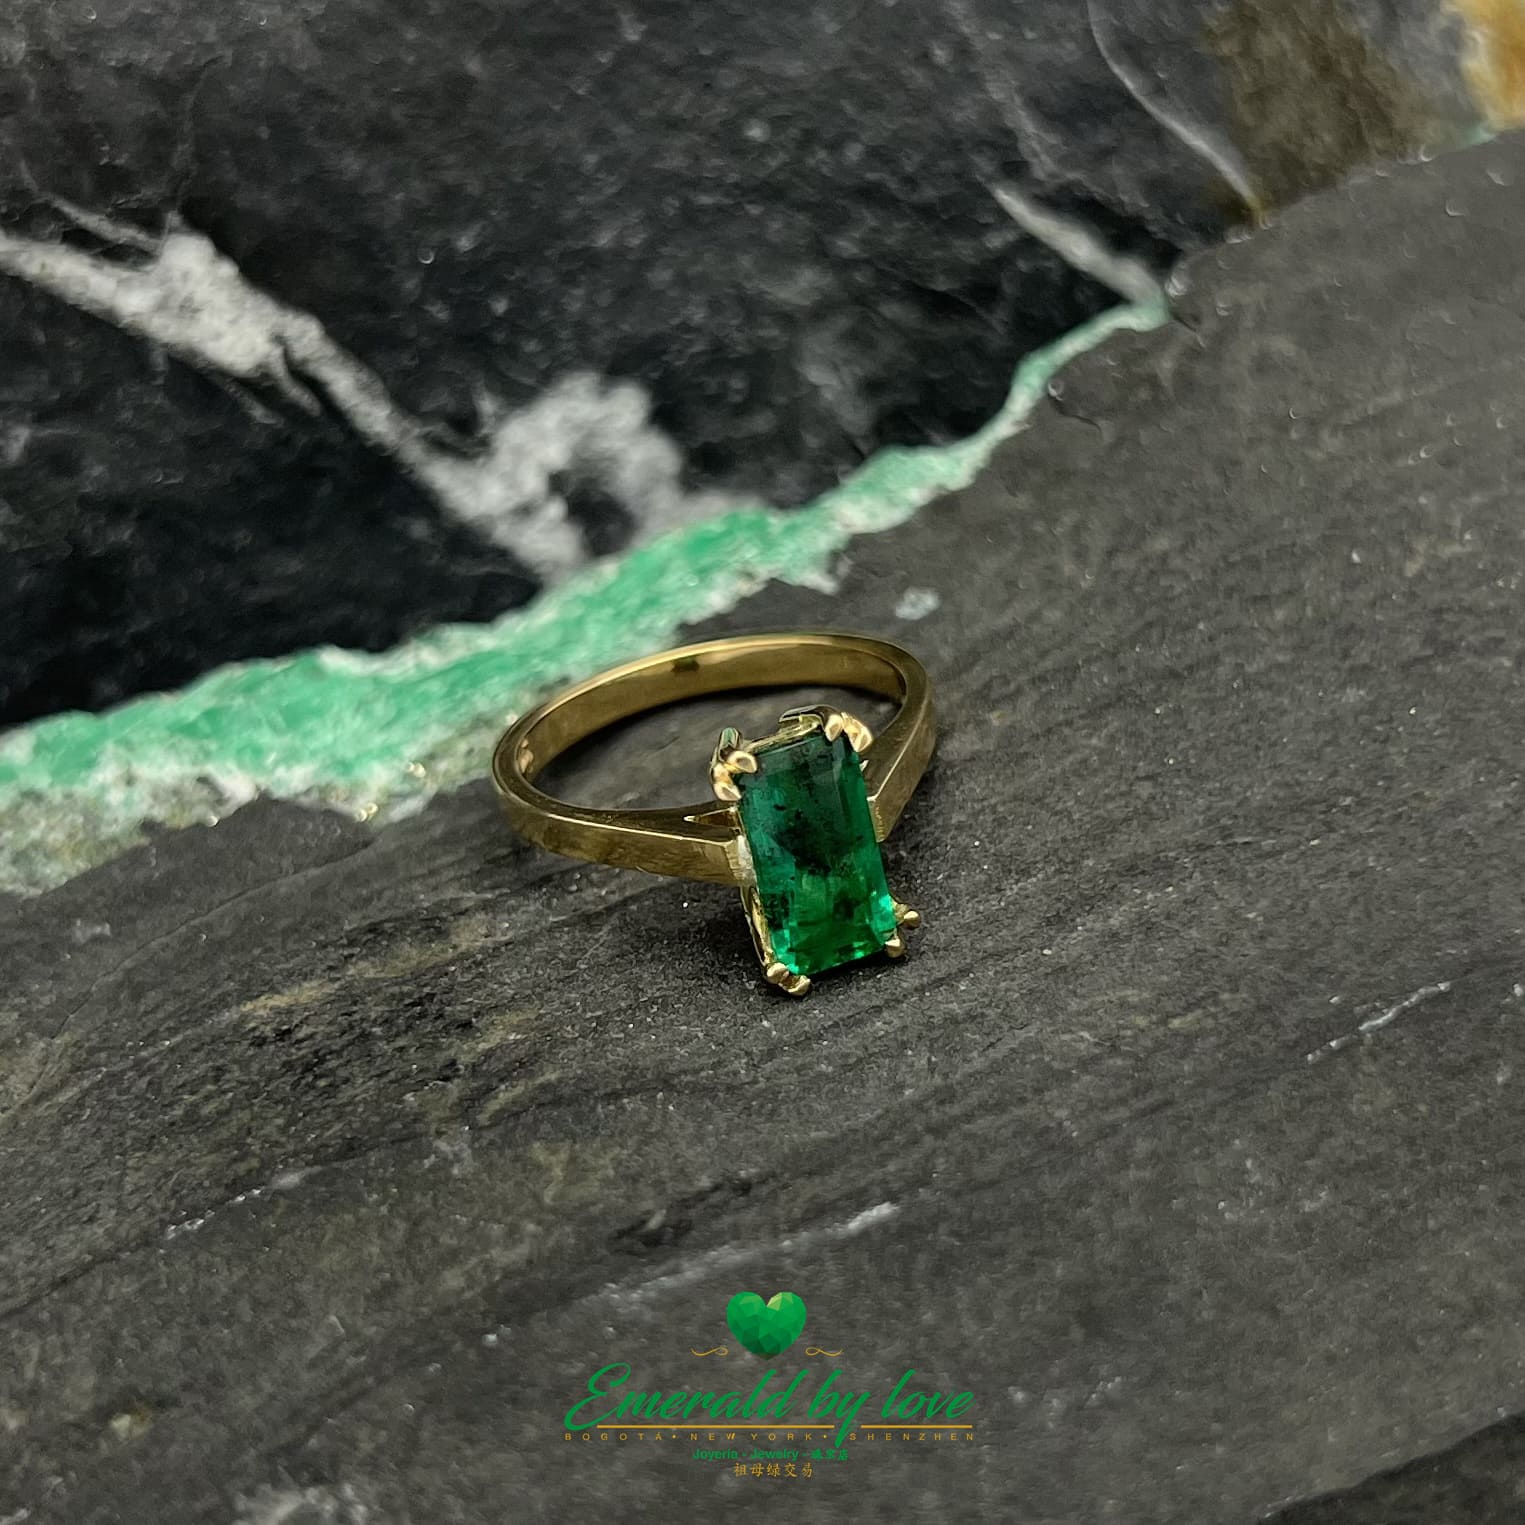 Divine Yellow Gold Ring with Rectangular Emerald in U-Prong Setting